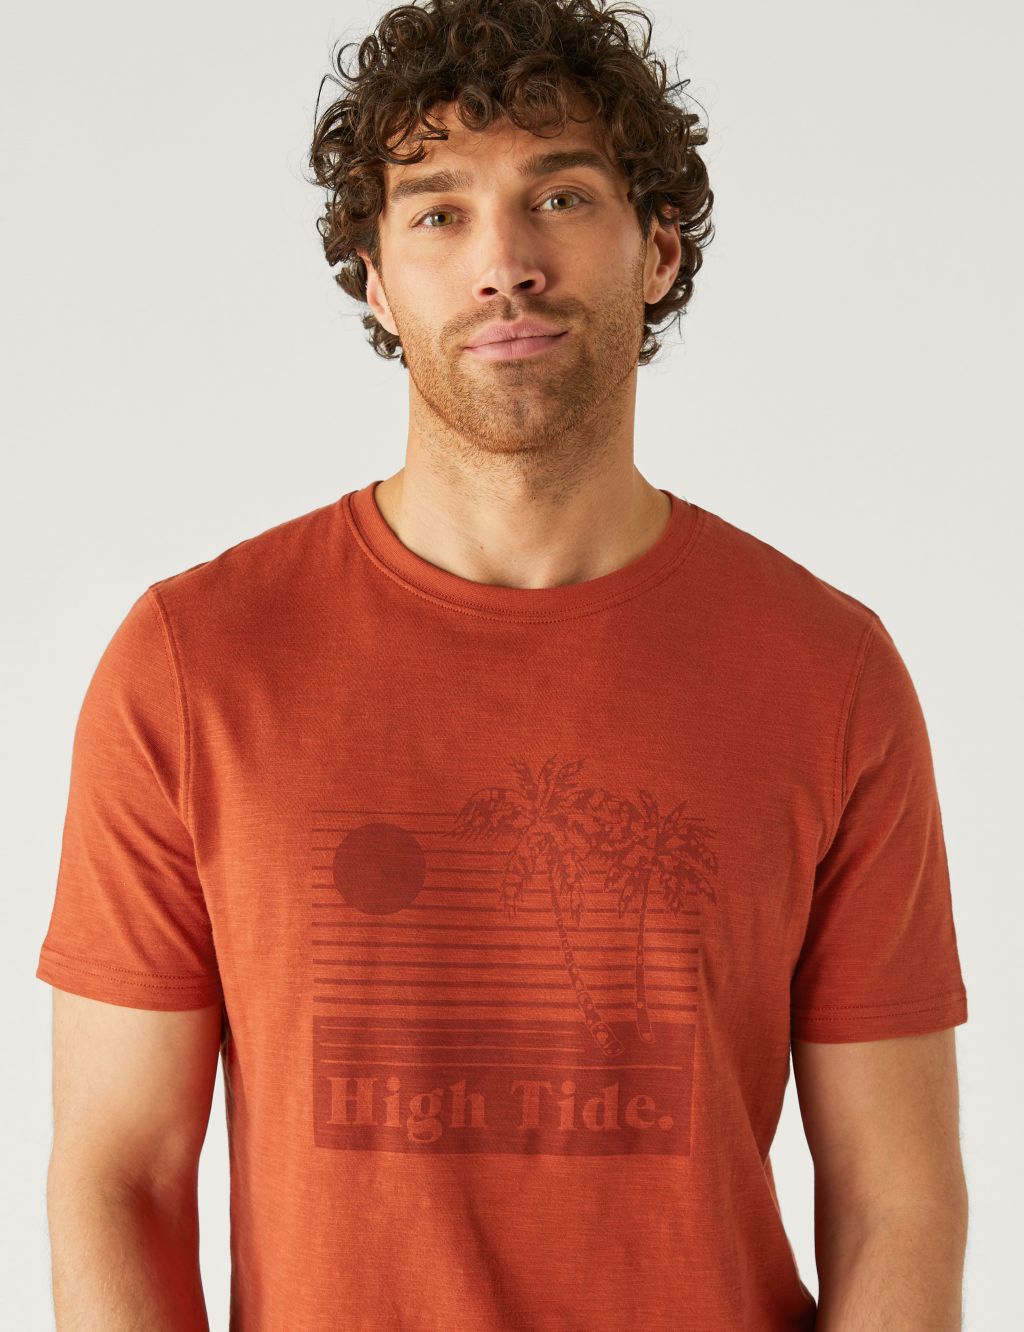 Pure Cotton High Tide Graphic T-Shirt image 1